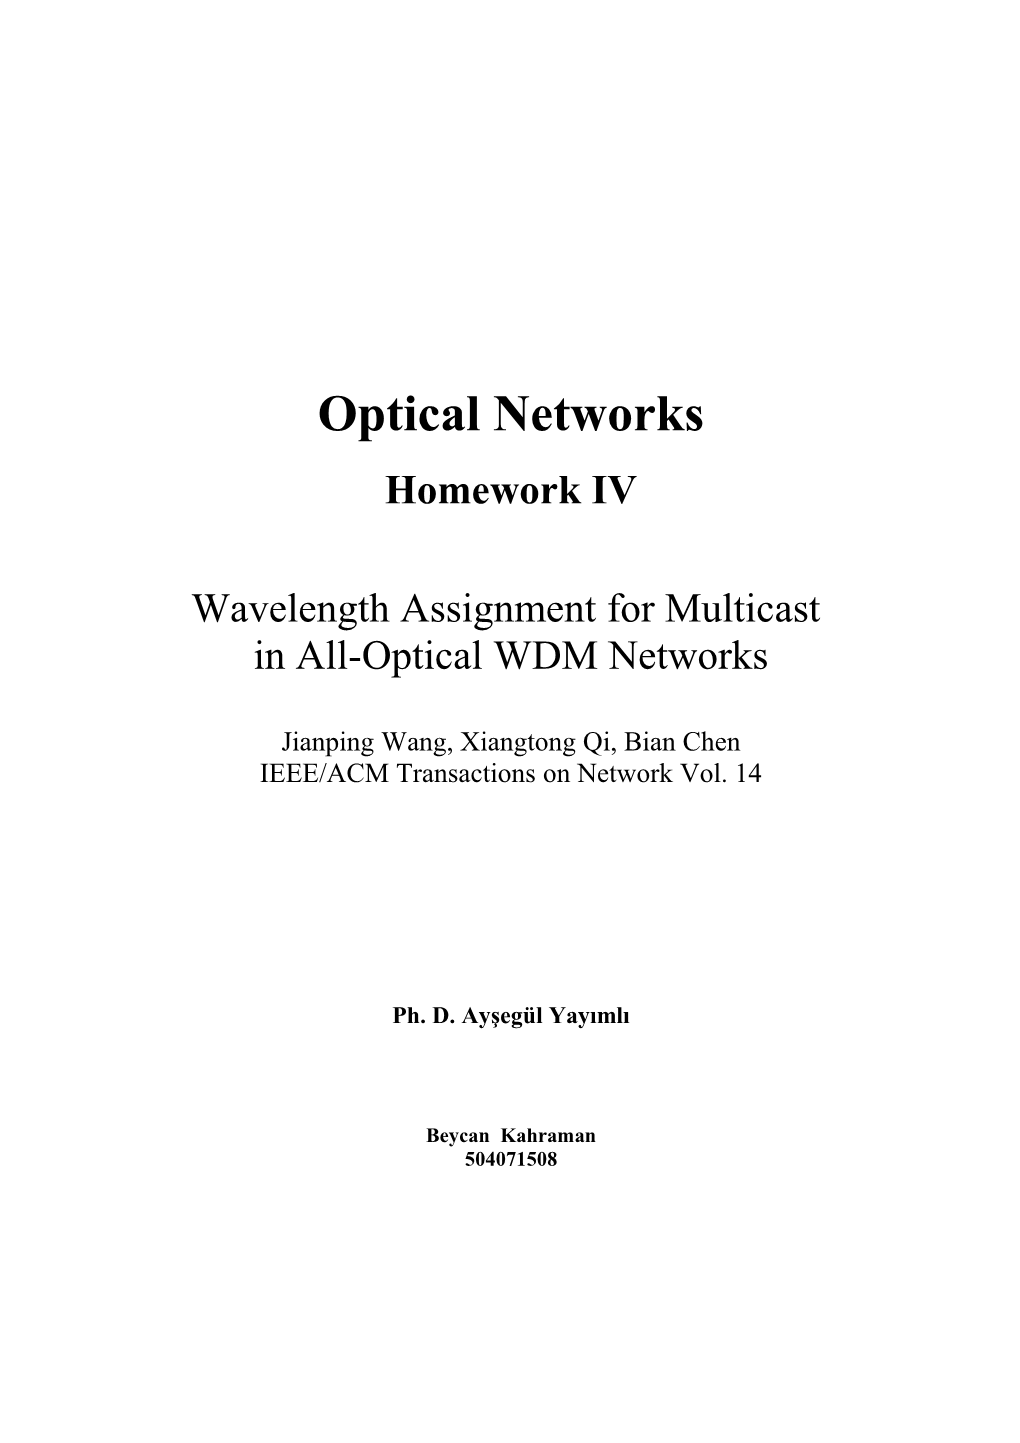 Wavelength Assignment for Multicast in All-Optical WDM Networks